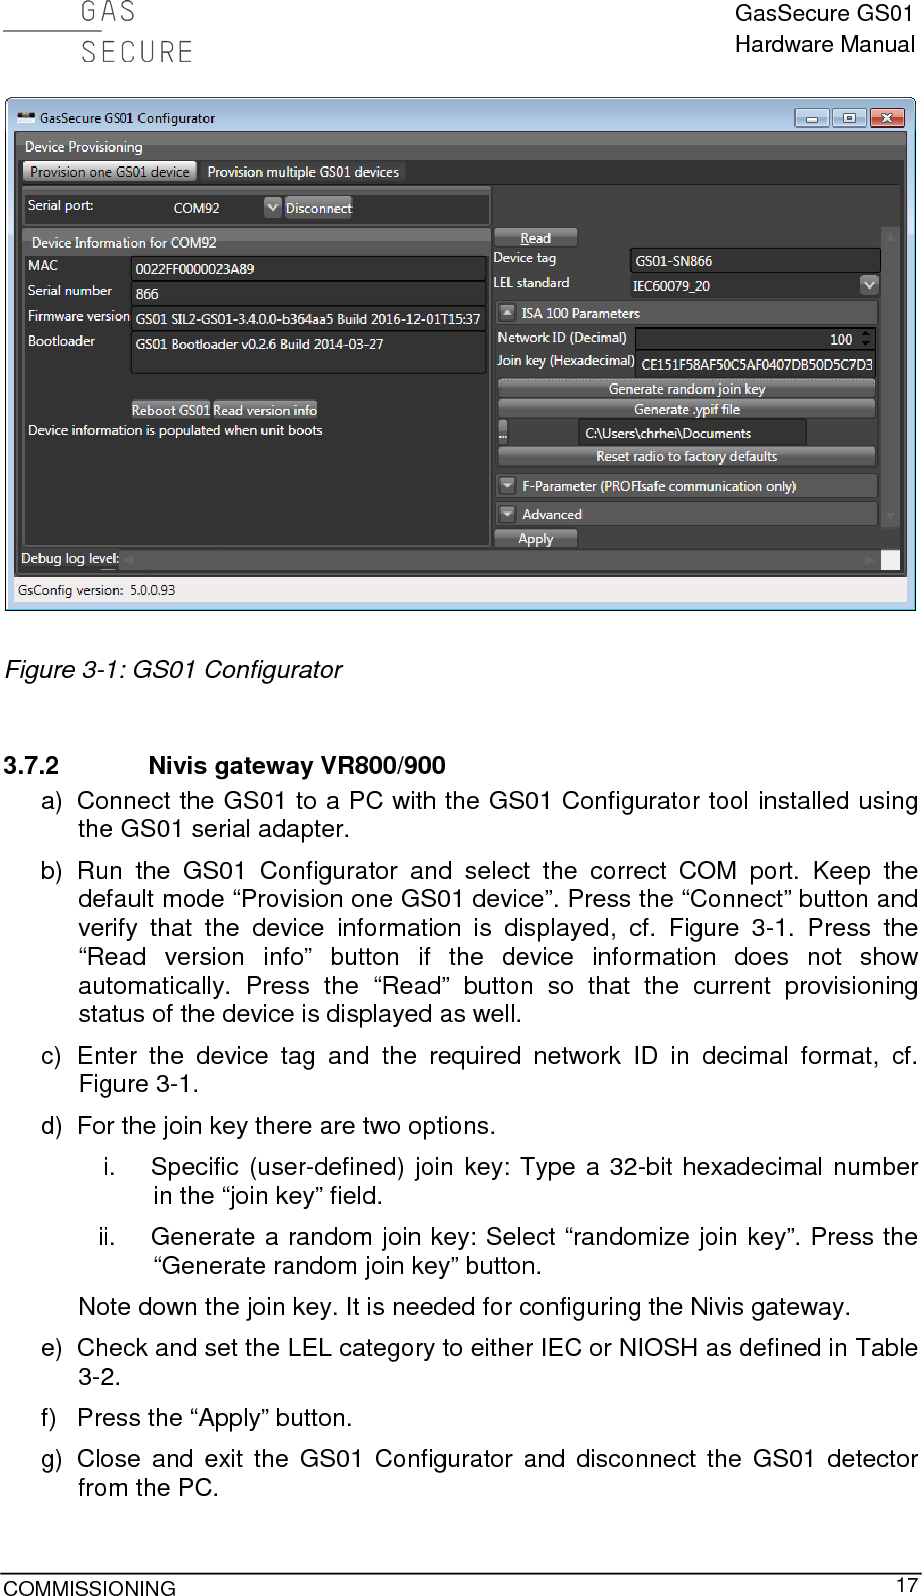  GasSecure GS01 Hardware Manual  COMMISSIONING     17   Figure 3-1: GS01 Configurator  3.7.2 Nivis gateway VR800/900 a) Connect the GS01 to a PC with the GS01 Configurator tool installed using the GS01 serial adapter. b) Run the GS01 Configurator and select the correct COM port. Keep the default mode “Provision one GS01 device”. Press the “Connect” button and verify that the device information is displayed, cf. Figure  3-1. Press the “Read version info” button if the device information does not show automatically. Press the “Read” button so that the current provisioning status of the device is displayed as well. c)  Enter the device tag and  the required network ID in decimal format, cf. Figure 3-1. d) For the join key there are two options. i. Specific (user-defined) join key: Type a 32-bit hexadecimal number in the “join key” field. ii. Generate a random join key: Select “randomize join key”. Press the “Generate random join key” button. Note down the join key. It is needed for configuring the Nivis gateway. e) Check and set the LEL category to either IEC or NIOSH as defined in Table 3-2. f) Press the “Apply” button. g) Close and exit the GS01 Configurator and disconnect the GS01 detector from the PC. 